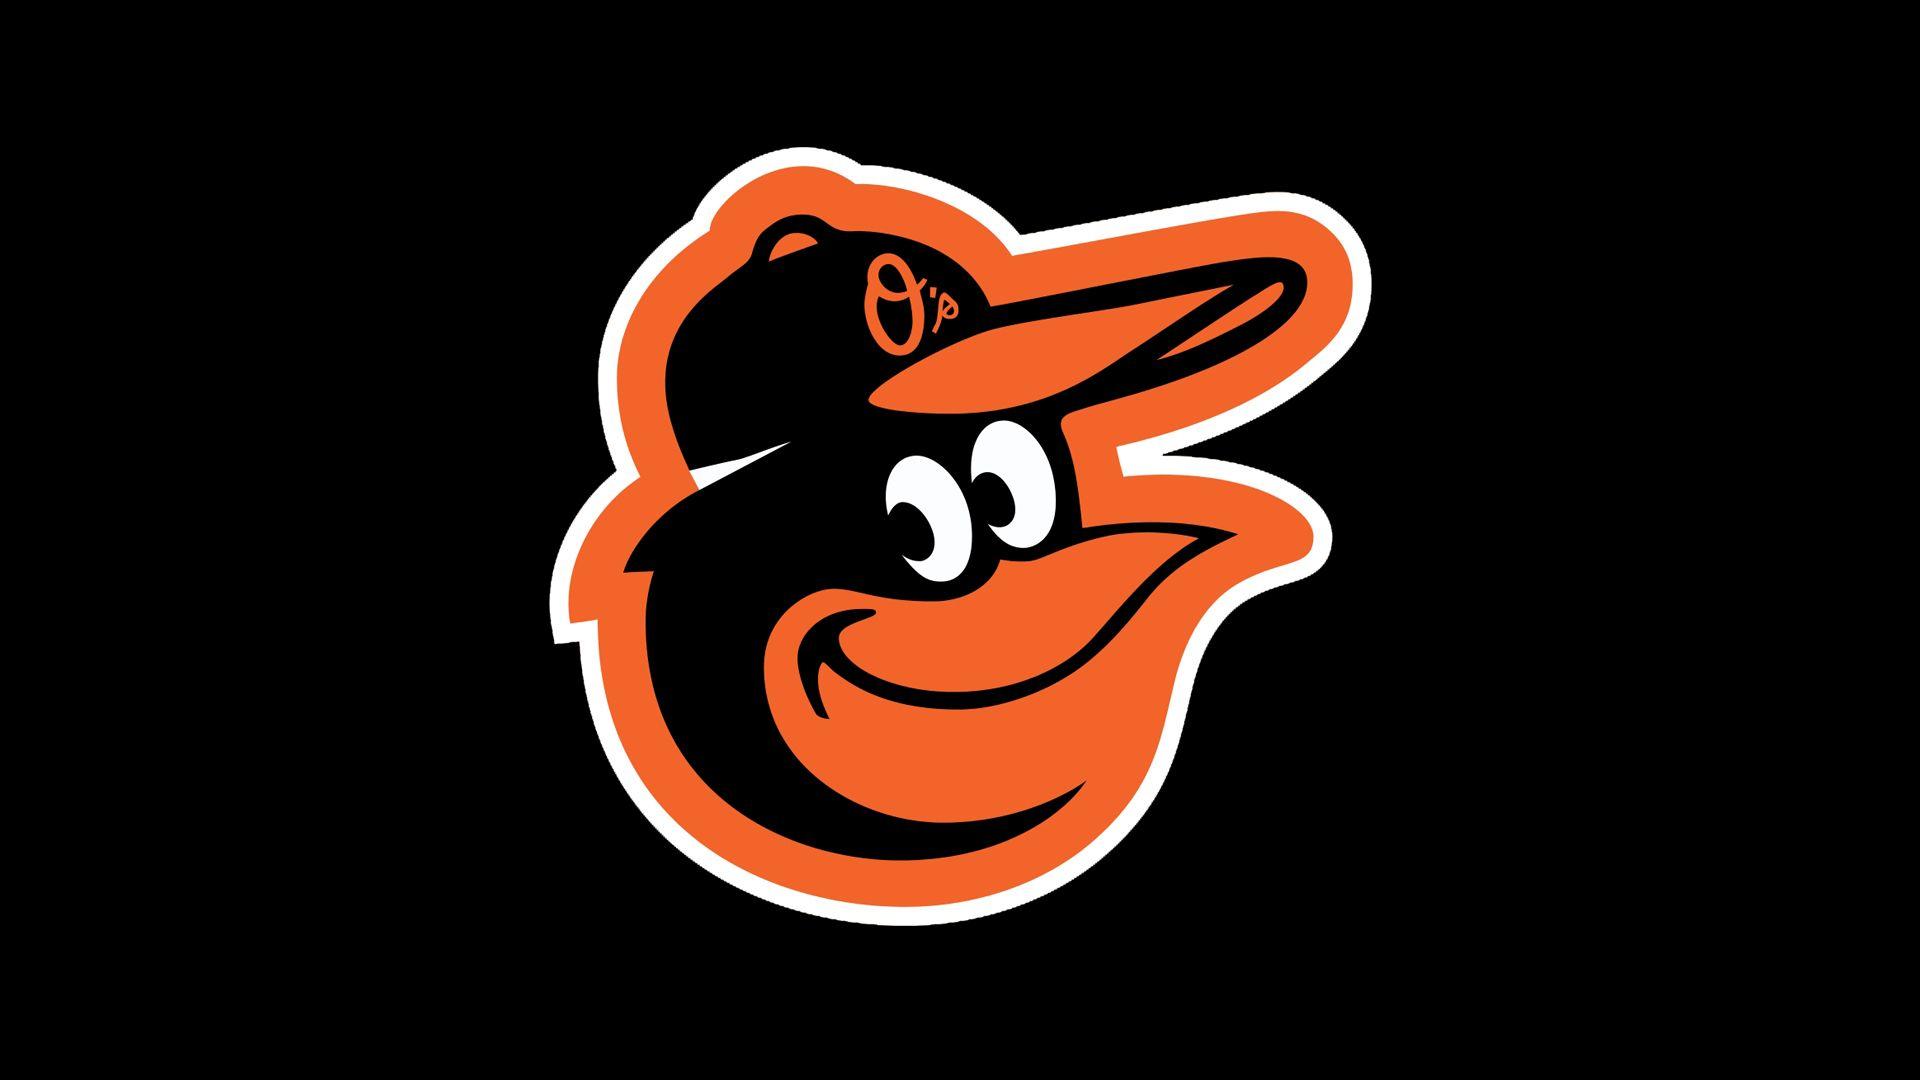 Baltimore Orioles Wallpaper, Browser Themes and More